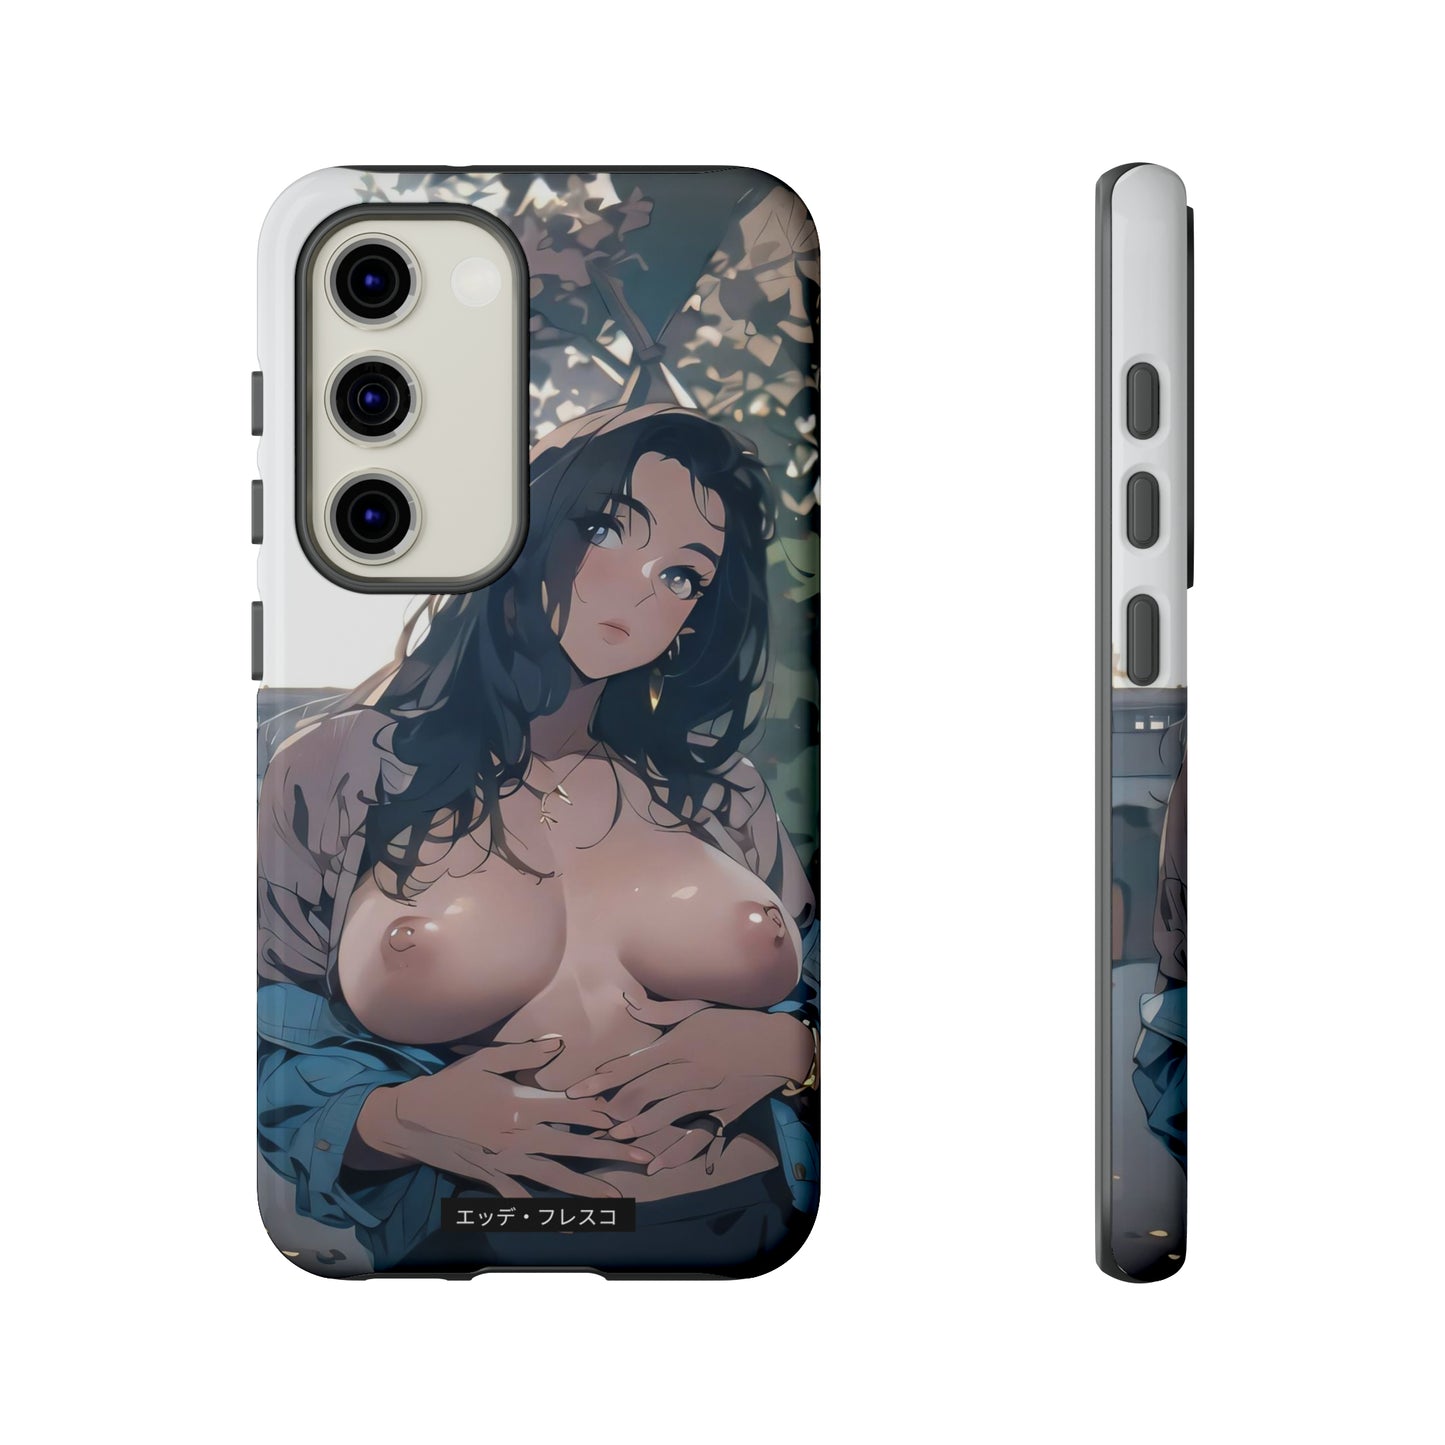 Anime Style Art Tough Cases- "Forest Love"